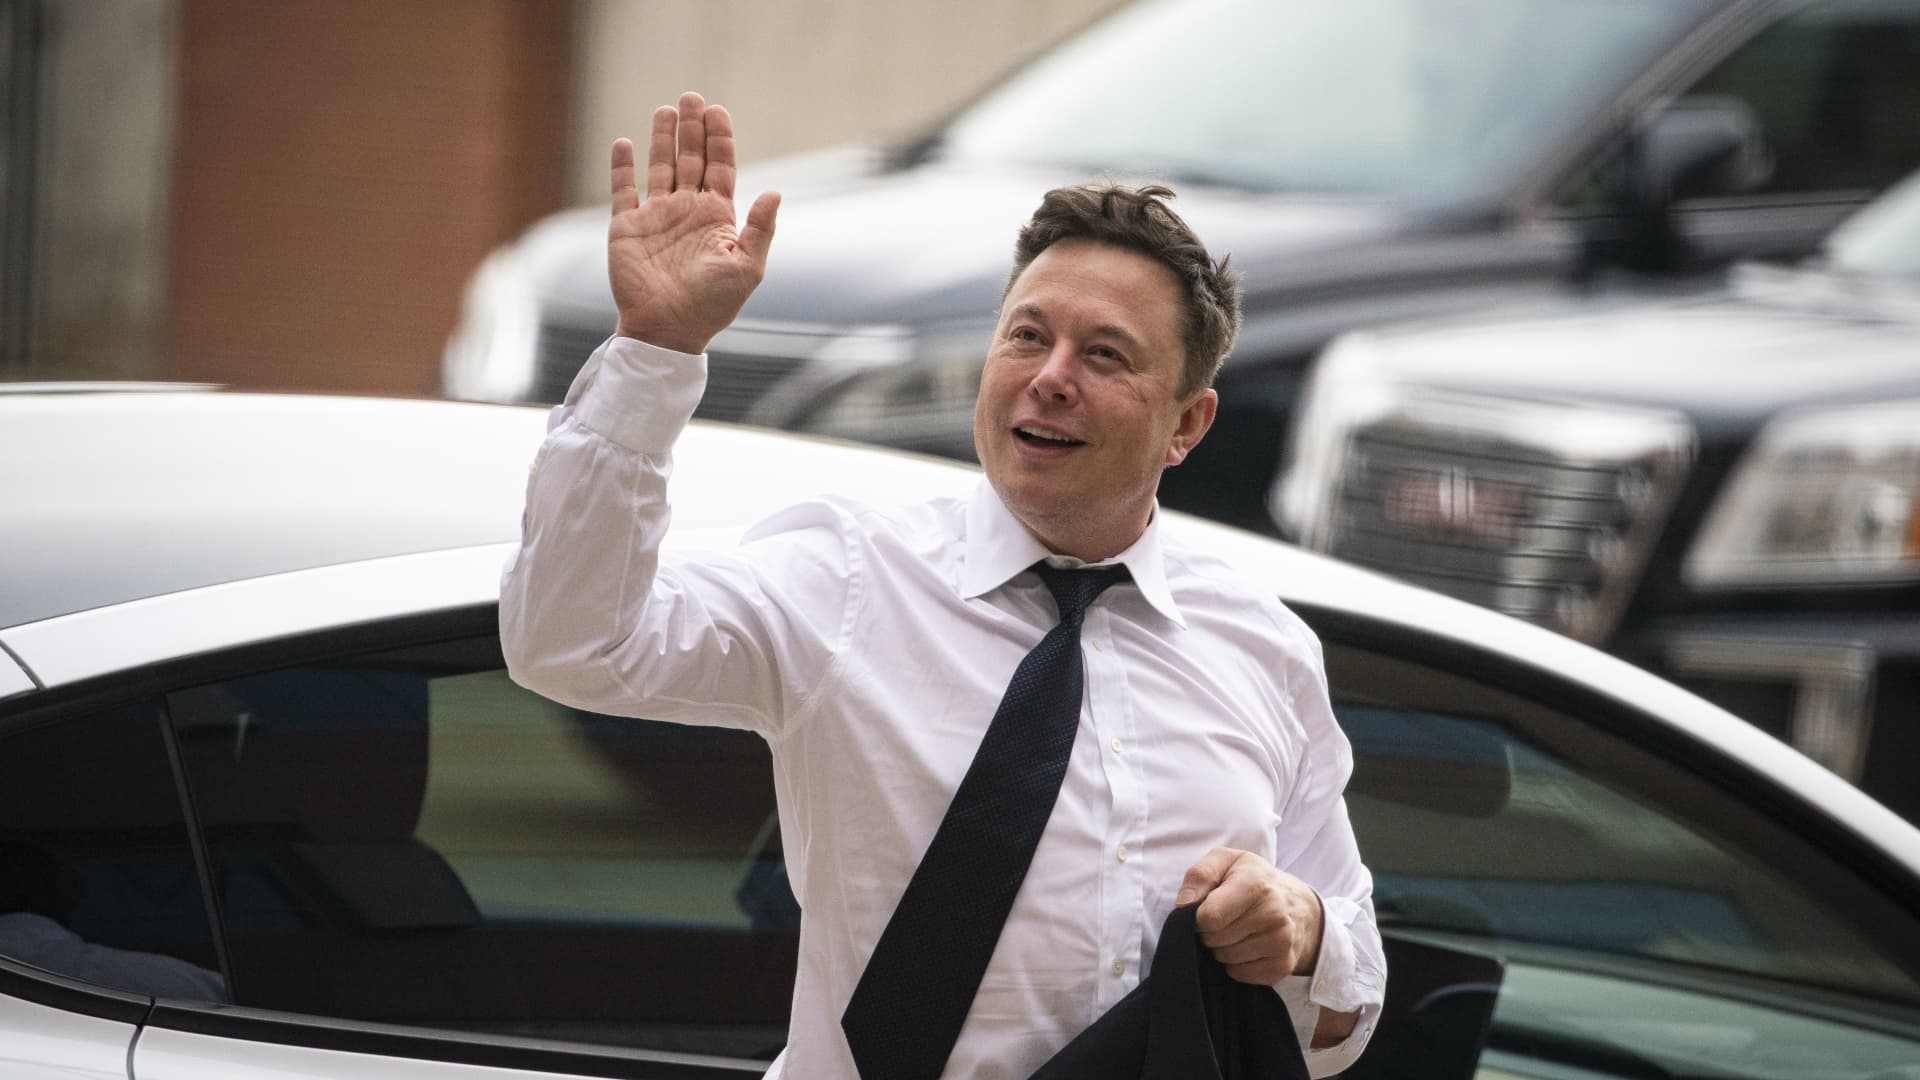 Elon Musk, chief executive officer of Tesla Inc., arrives at court during the SolarCity trial in Wilmington, Delaware, U.S., on Tuesday, July 13, 2021.